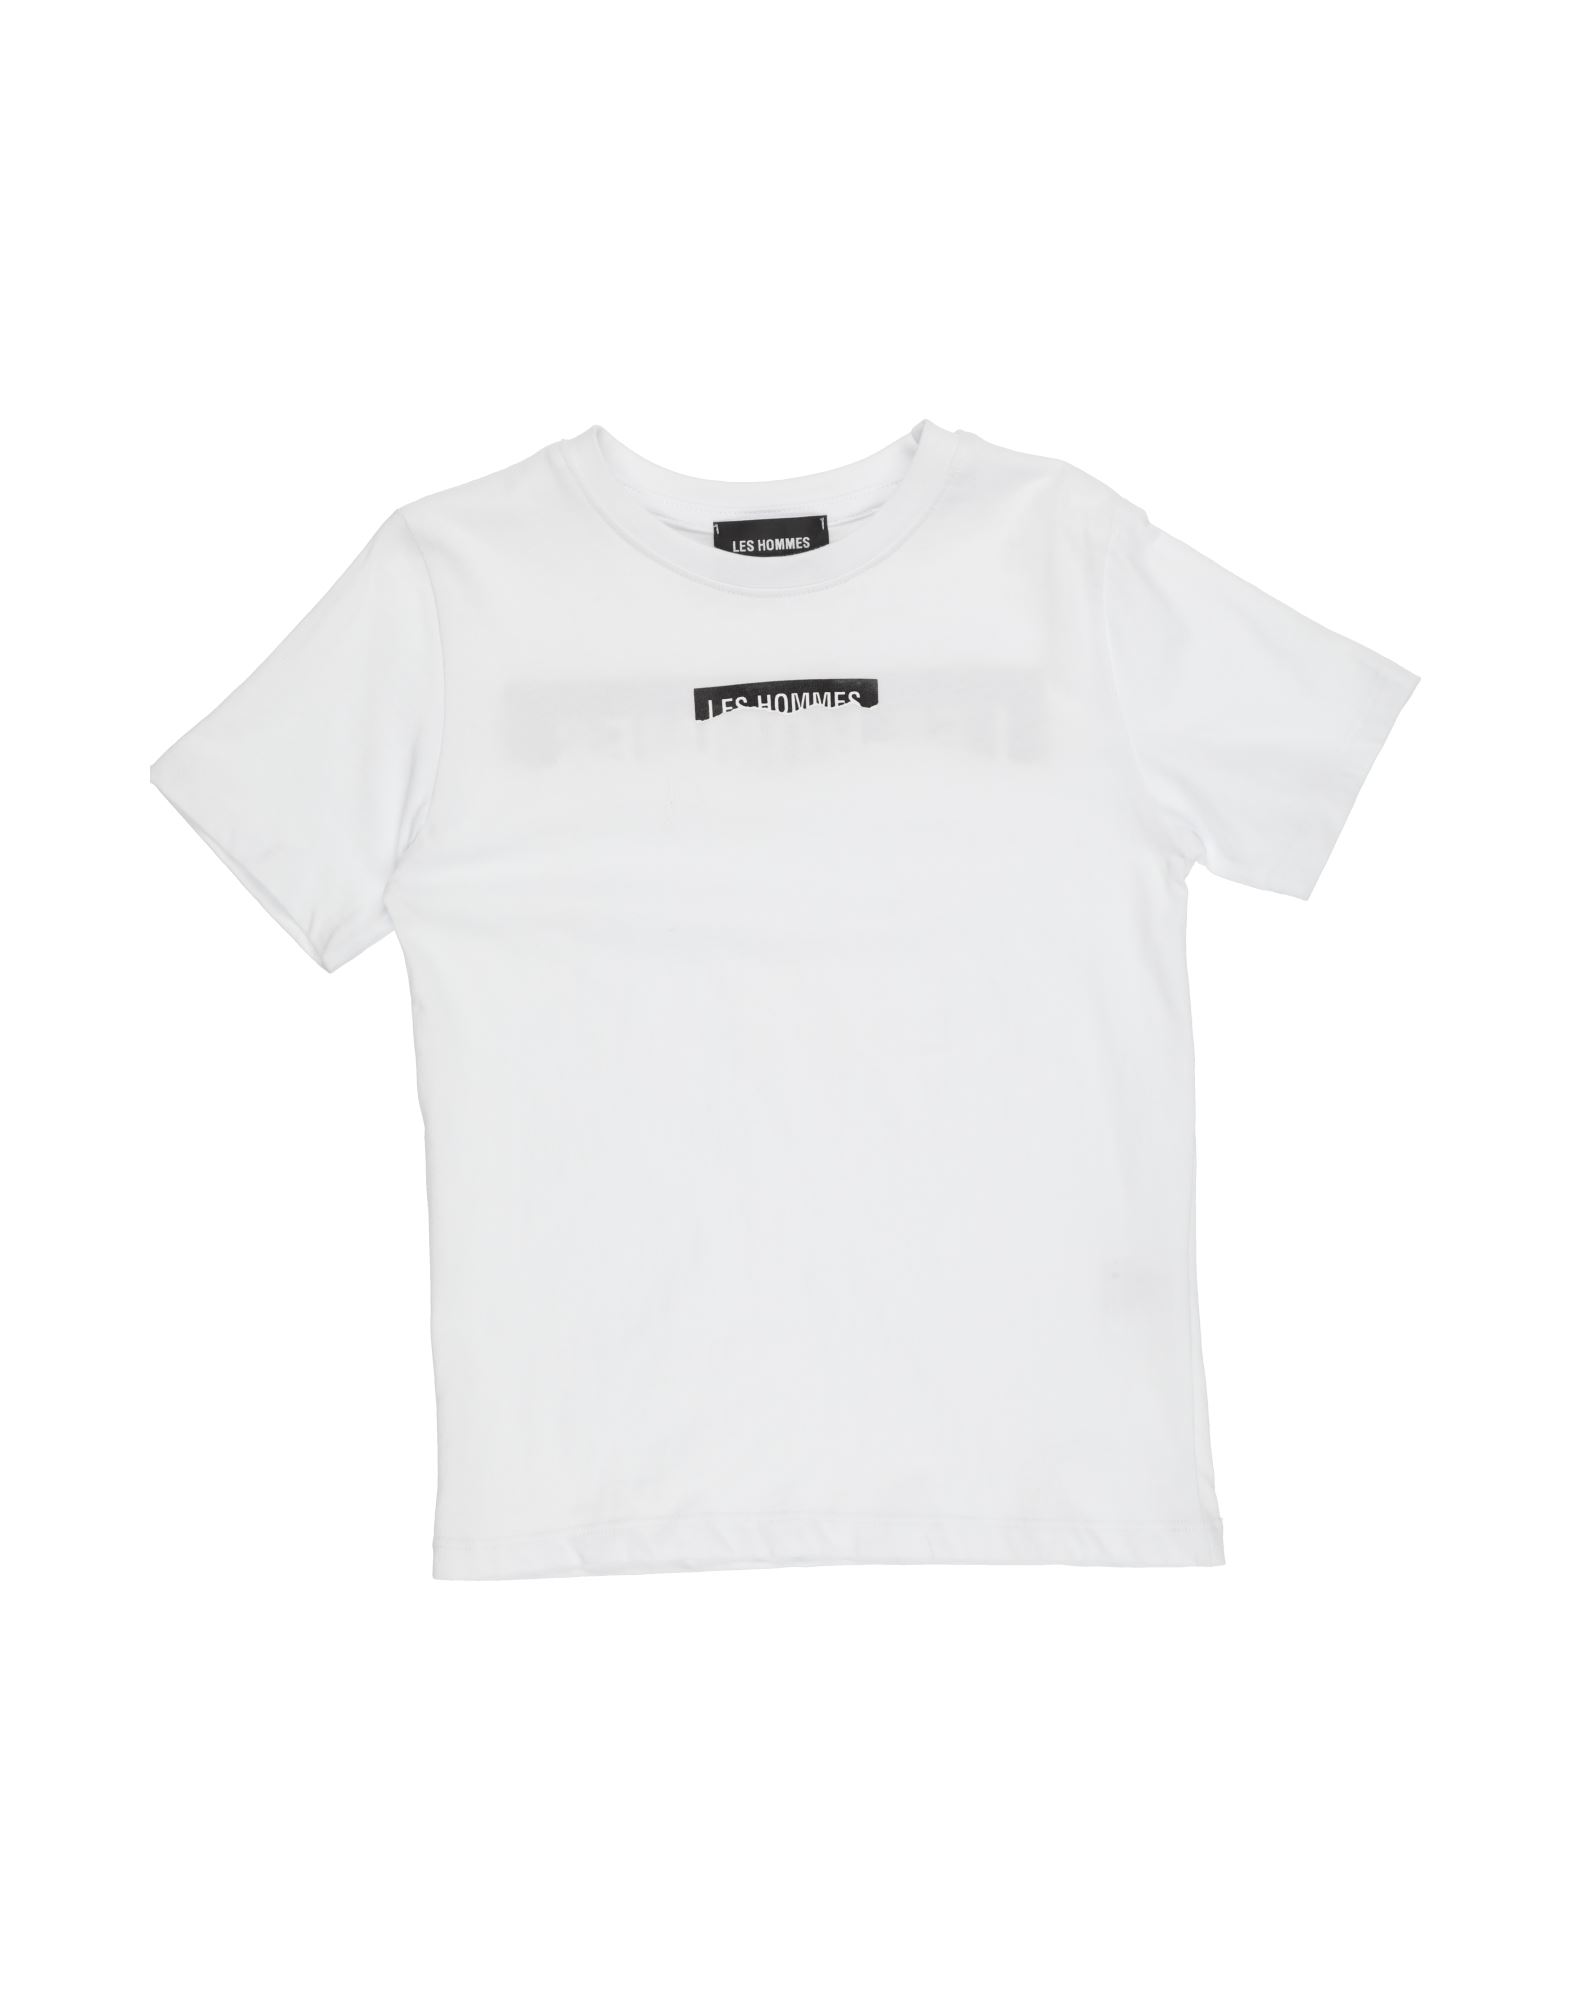 Les Hommes Kids'  T-shirts In White